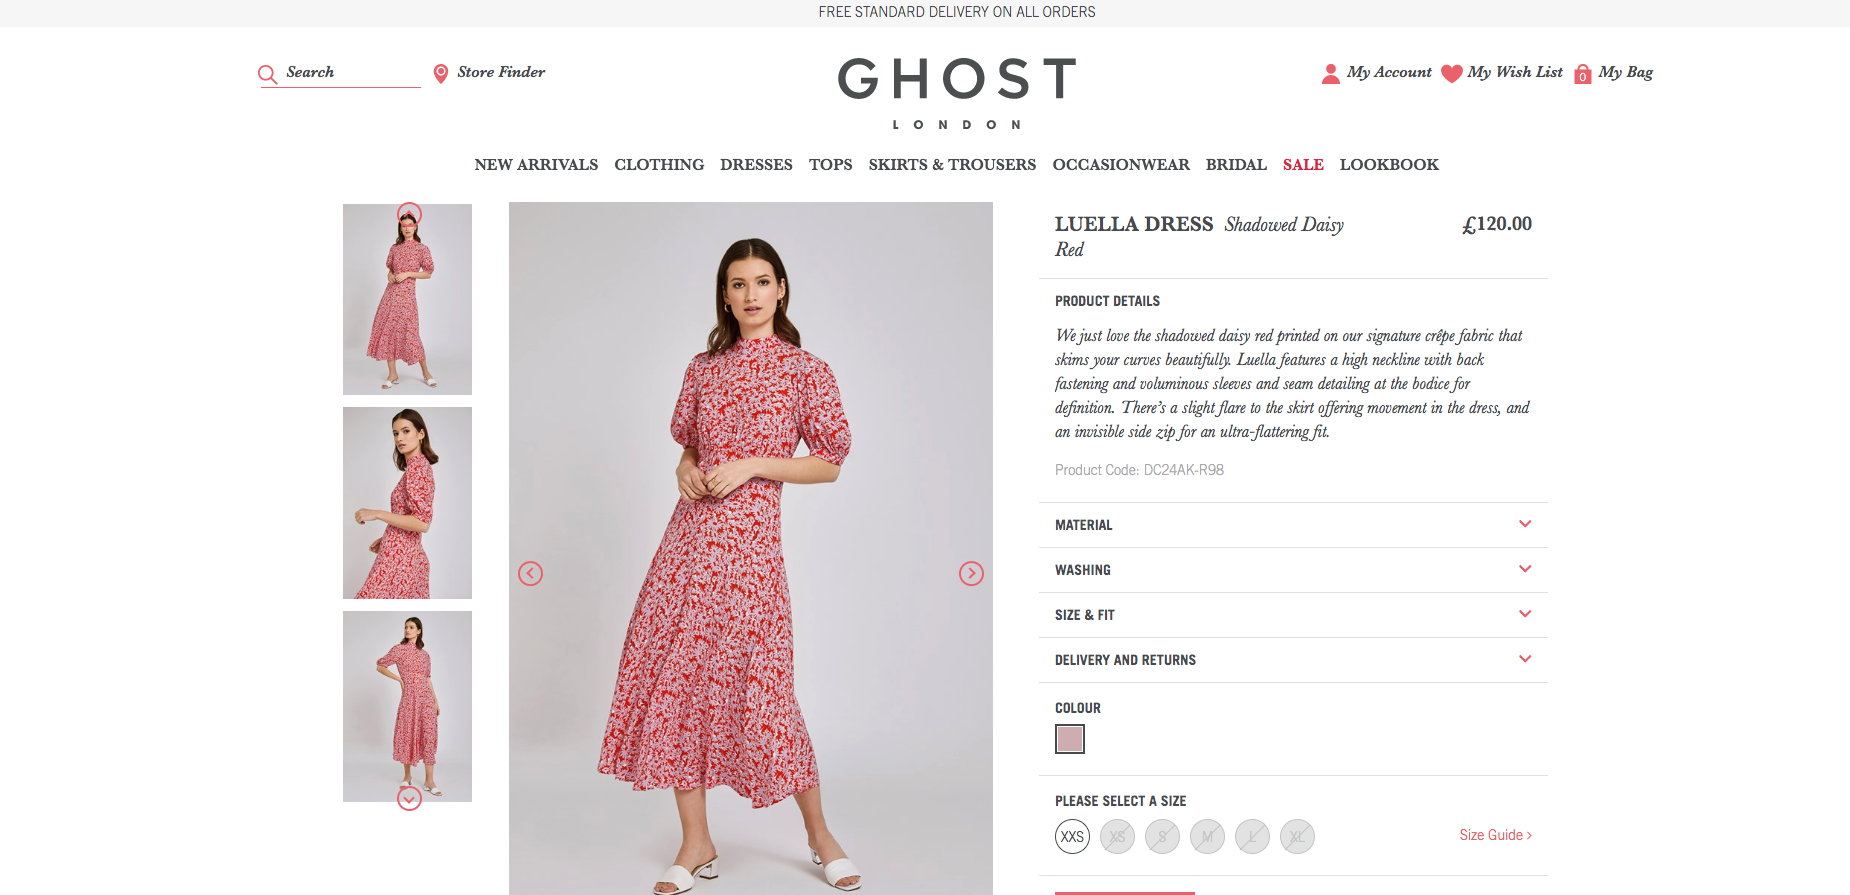 The dress is currently sold out (Ghost)